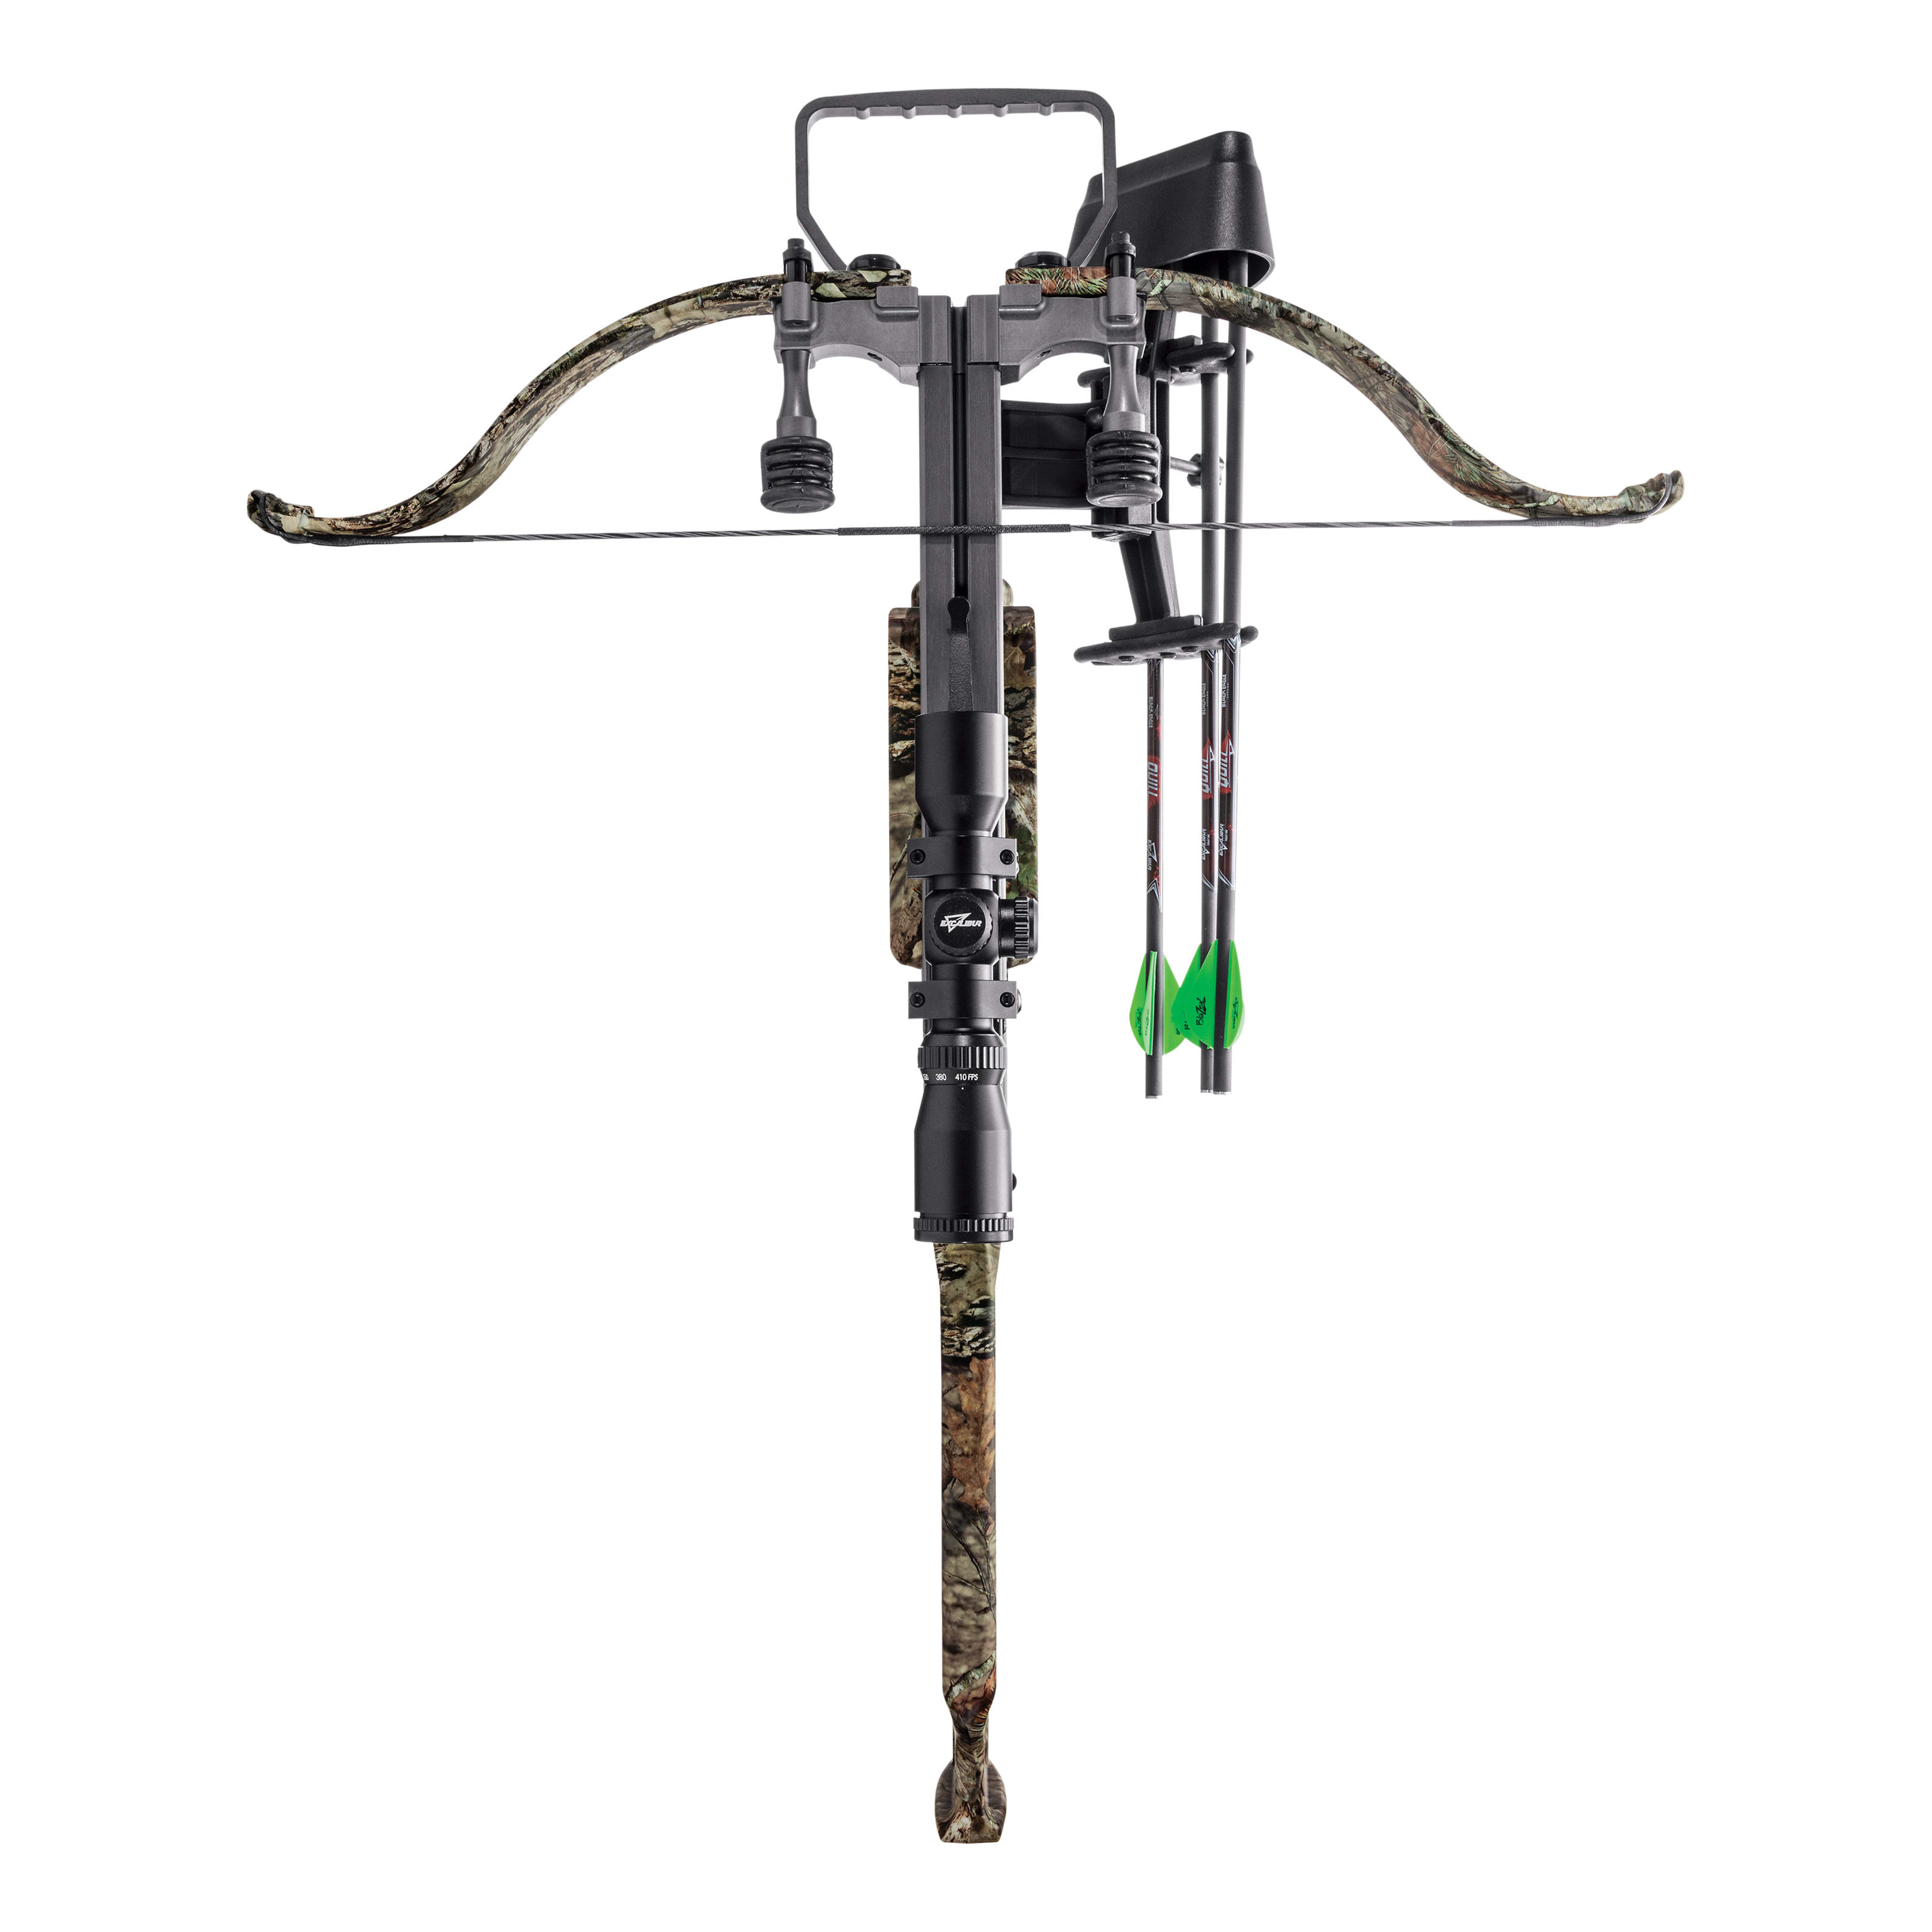 Excalibur MAG 340 Crossbow Package - Overhead View